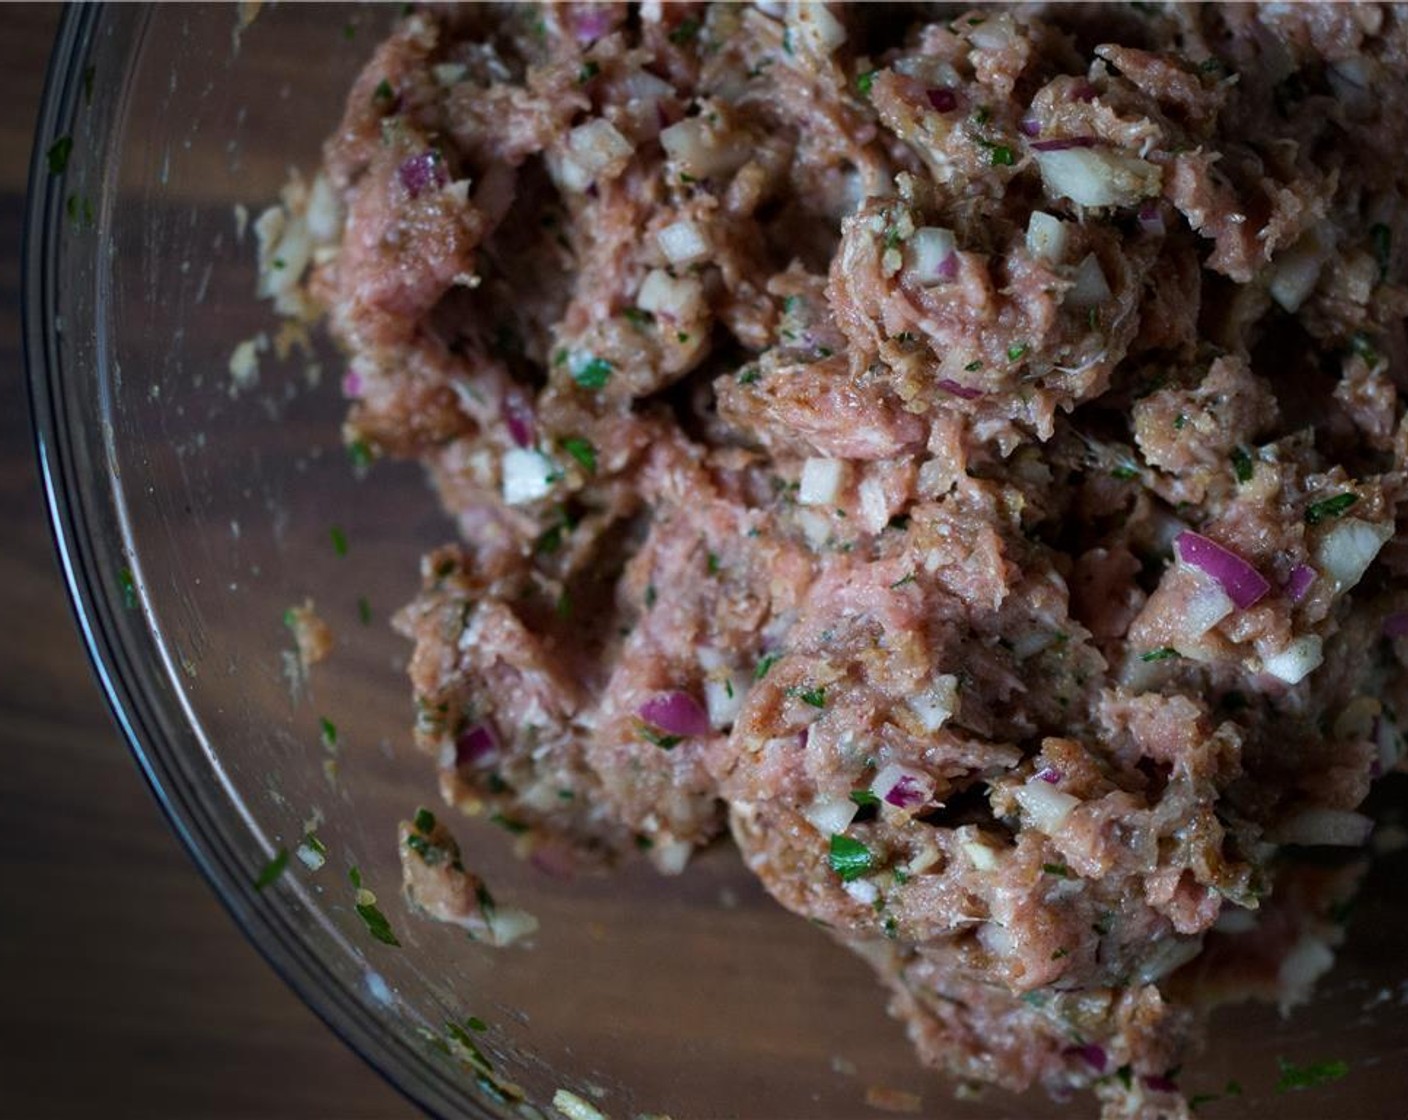 step 2 In a large bowl, mix all ingredients for the meatballs Ground Lamb (1.5 lb), Bulgur Wheat (2 Tbsp), Garlic (2 cloves), Red Onion (1), Kosher Salt (1 tsp), Ground Black Pepper (1/2 tsp), {@10:}, Ground Cumin (1 1/4 tsp), Paprika (1 tsp), Ground Cinnamon (1/2 tsp), Italian Flat-Leaf Parsley (2 Tbsp) until well incorporated – hands work best for this. Cover and refrigerate for 30 minutes and up to 24 hours.